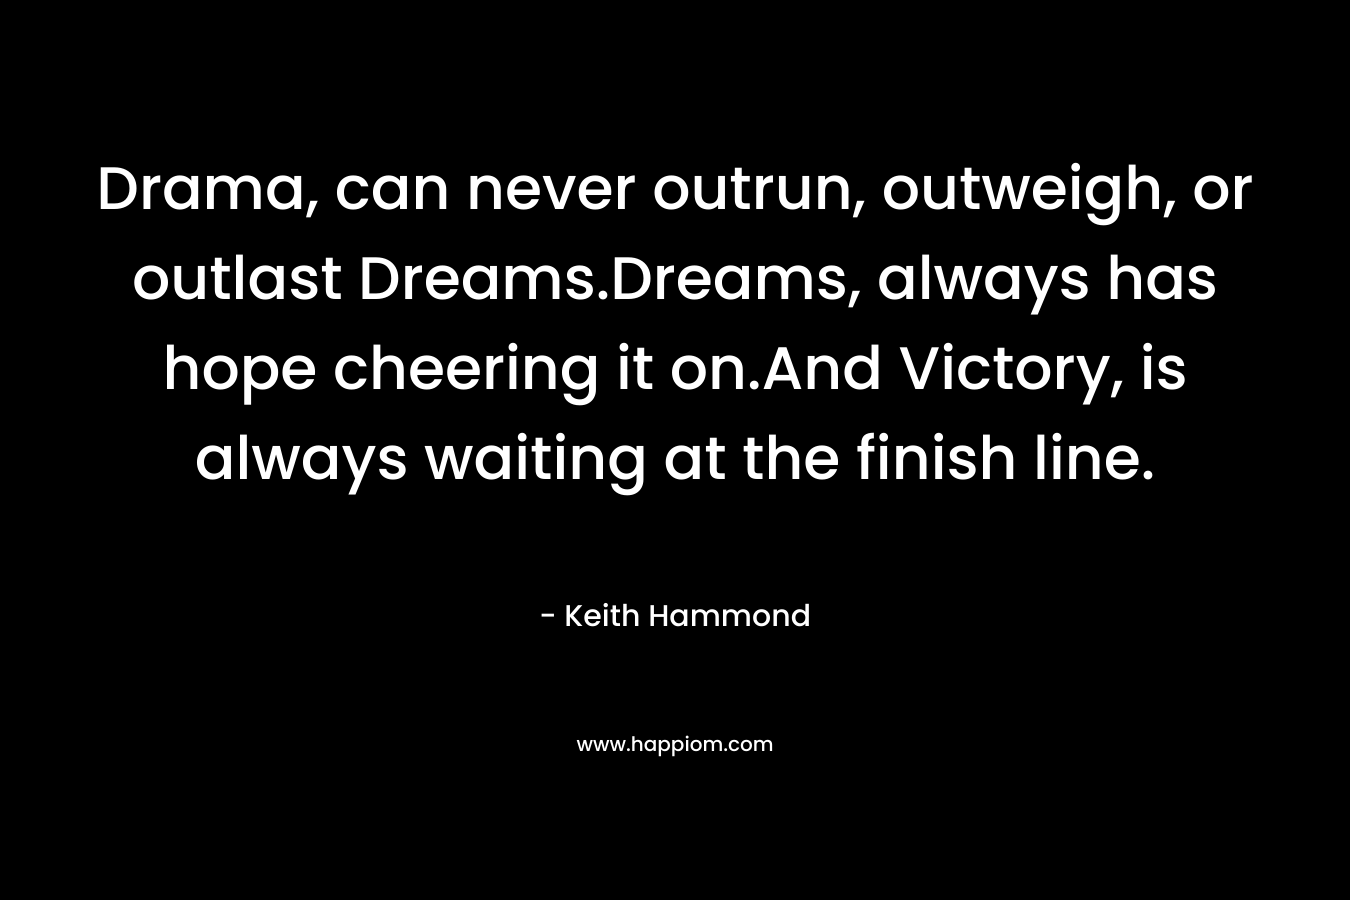 Drama, can never outrun, outweigh, or outlast Dreams.Dreams, always has hope cheering it on.And Victory, is always waiting at the finish line. – Keith Hammond